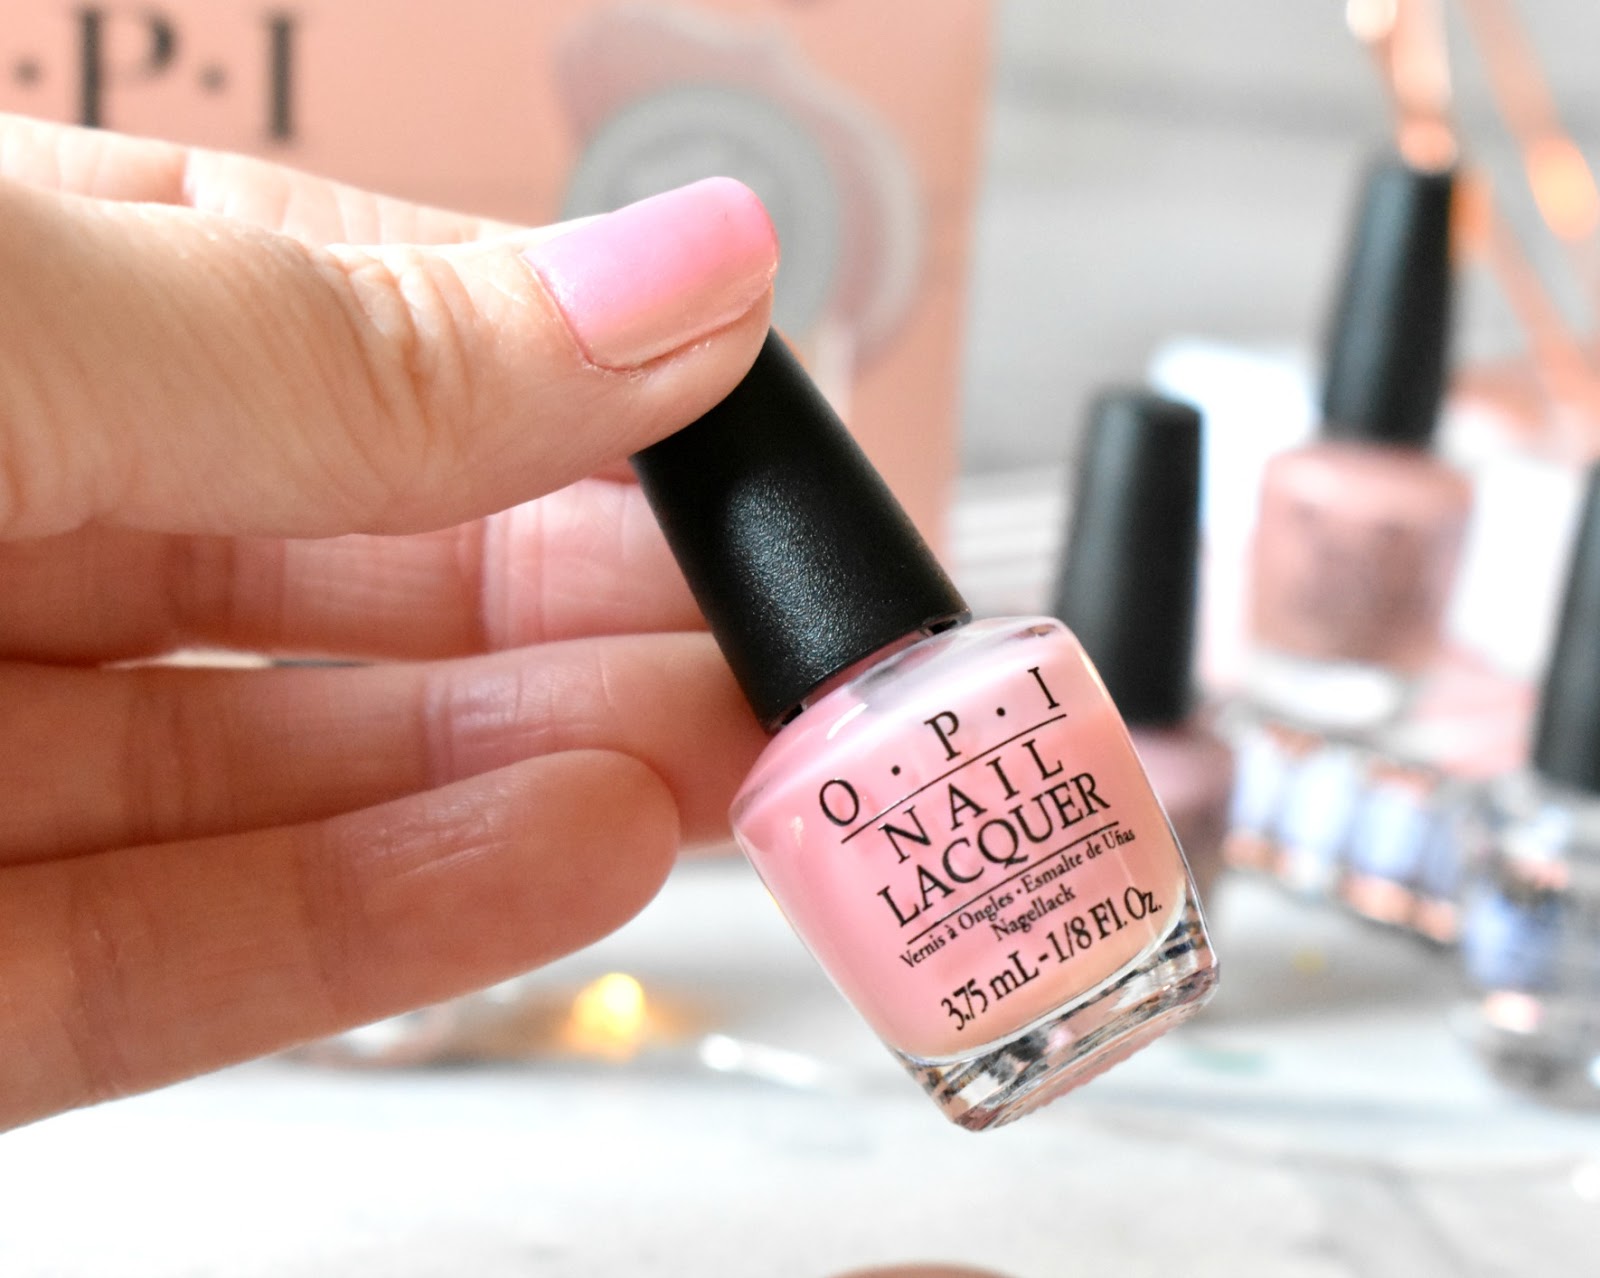 The Best-Selling OPI Neutral Nail Polish Shade (For The Minimalist Manicure  Trend)